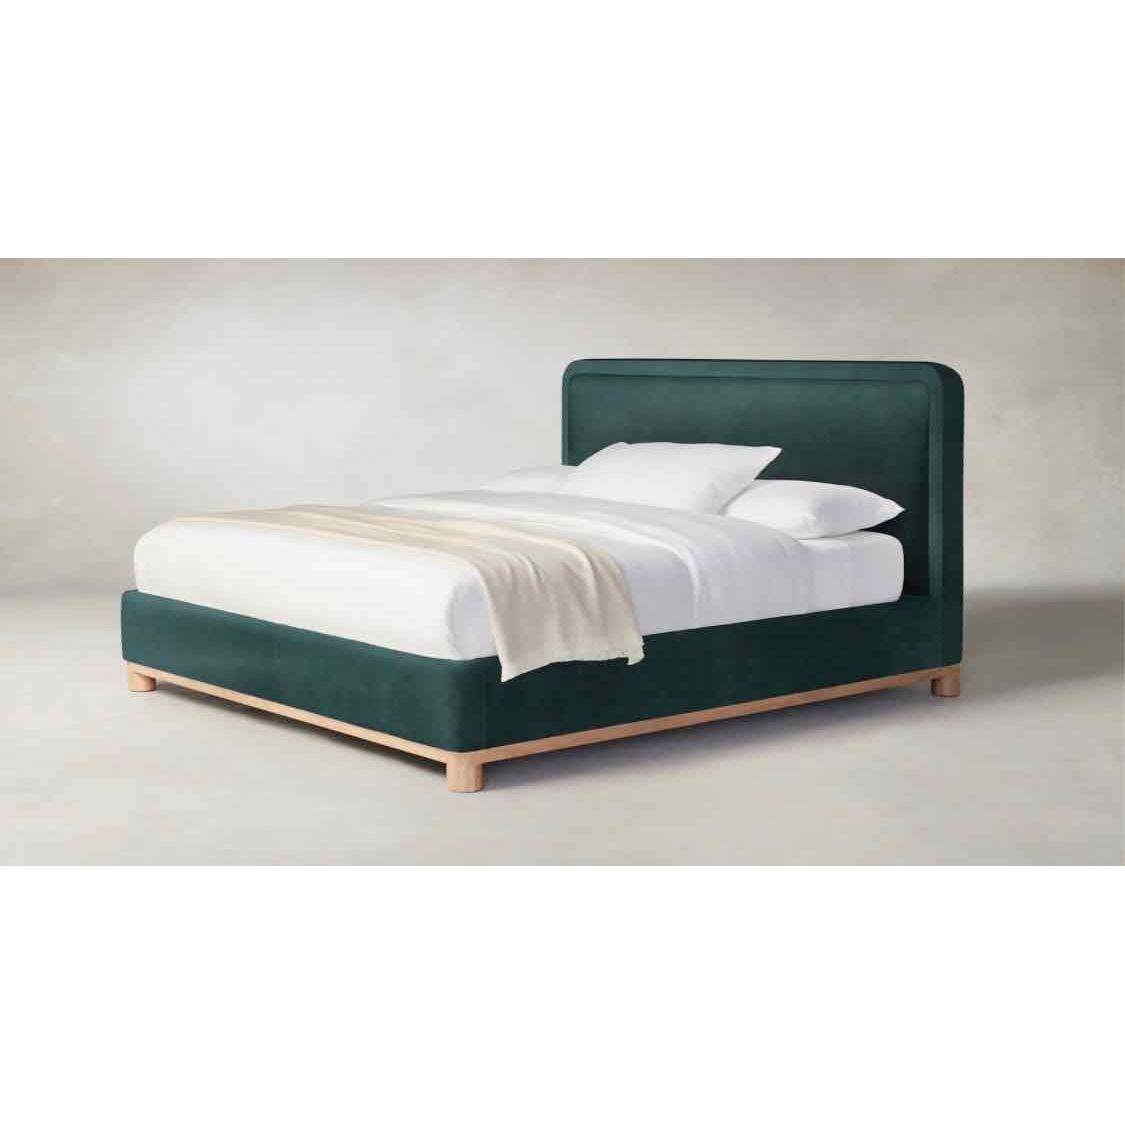 'The Kent' Queen Size Bed in Performance Velvet - Emerald by Maiden Home 47"Hx67